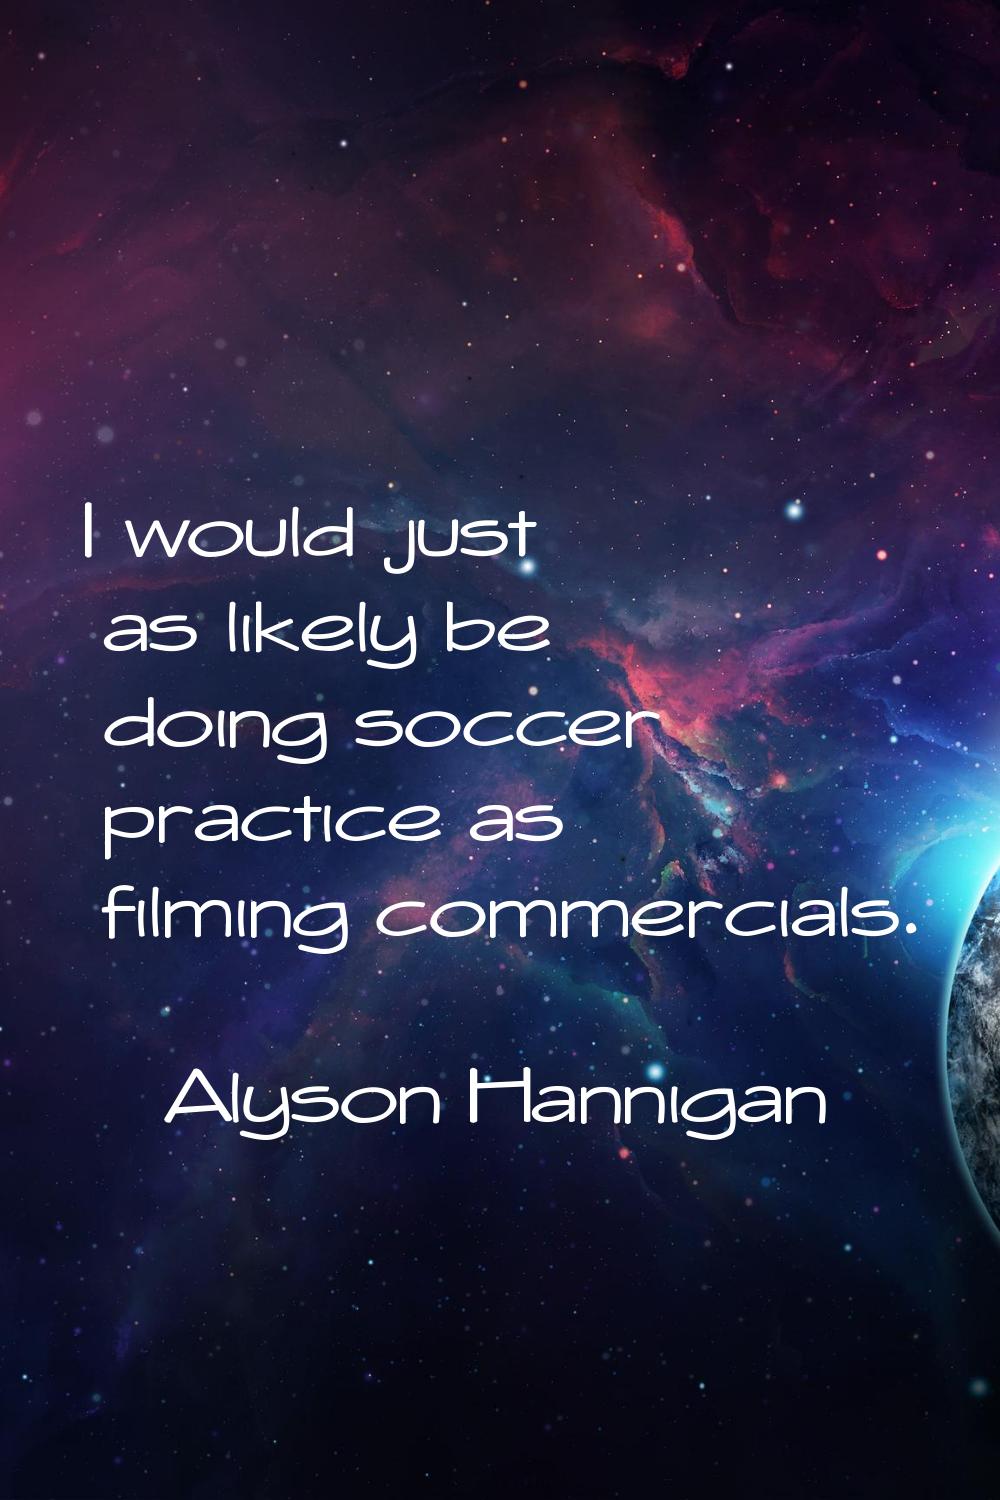 I would just as likely be doing soccer practice as filming commercials.